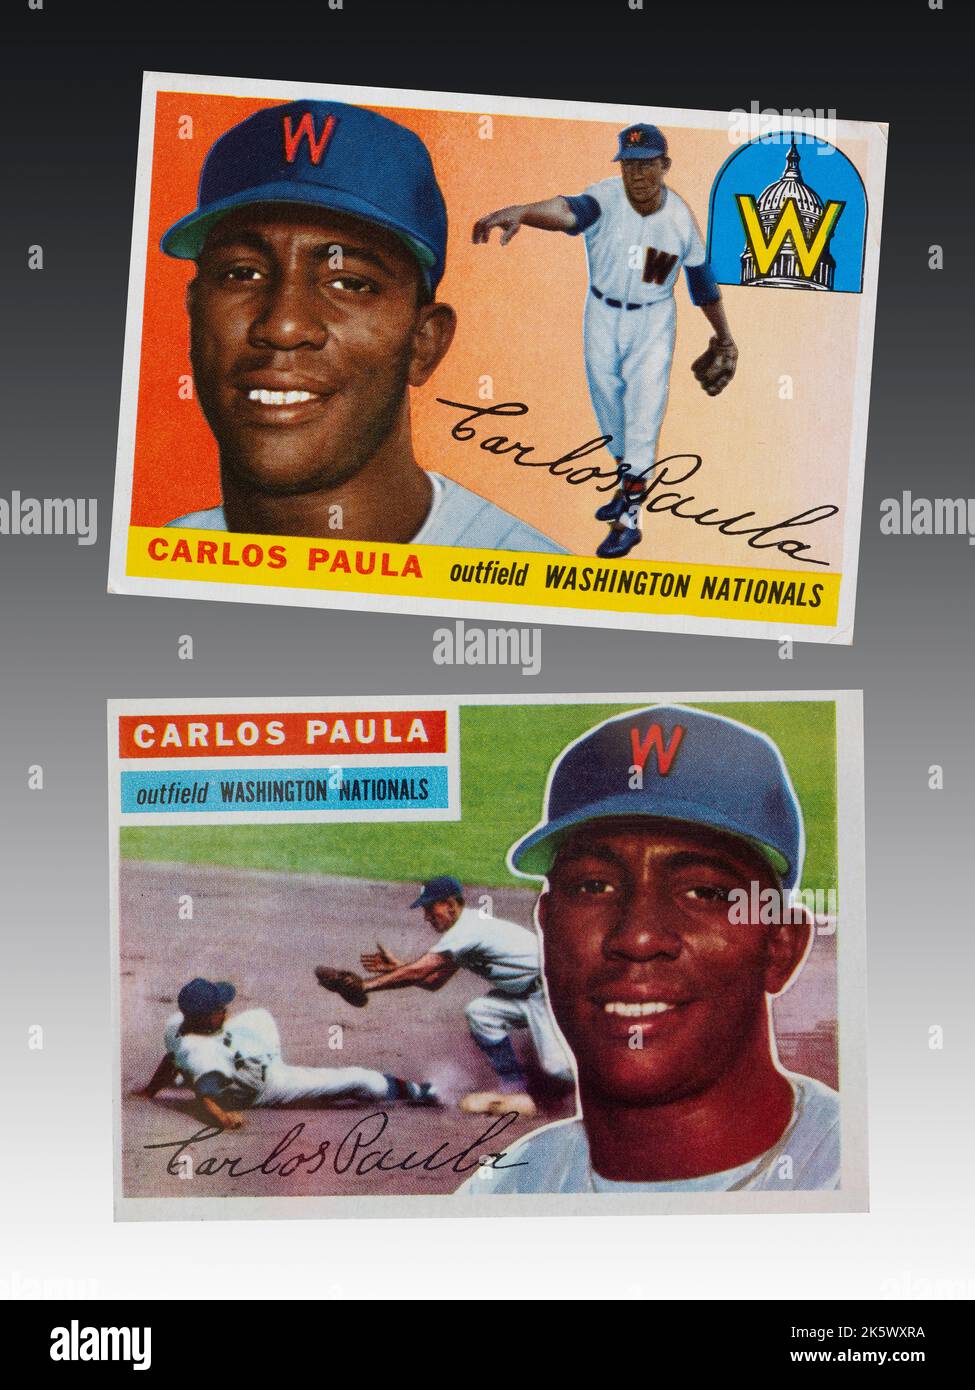 1955 and 1956 Washington Nationals baseball cards of outfielder Carlos Paula - On September 6, 1954 Carlos Paula Conill became the first black player Stock Photo